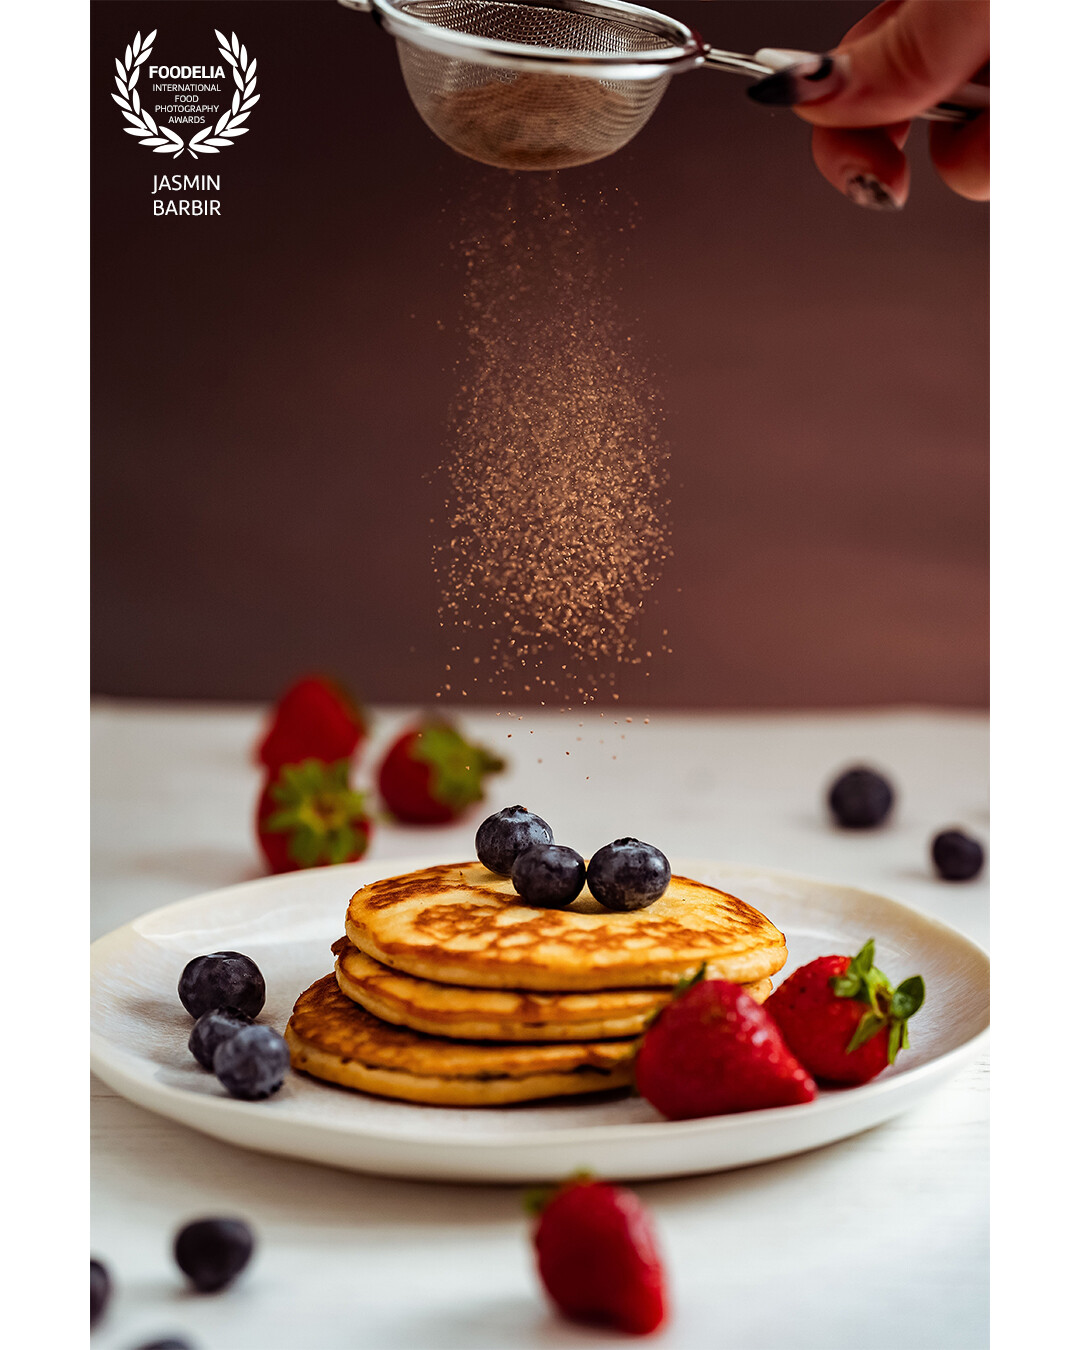 You just have to love pancakes. <br />
With a sprinkle of chocolate, fresh strawberries and blueberries on the top, who wouldn't?